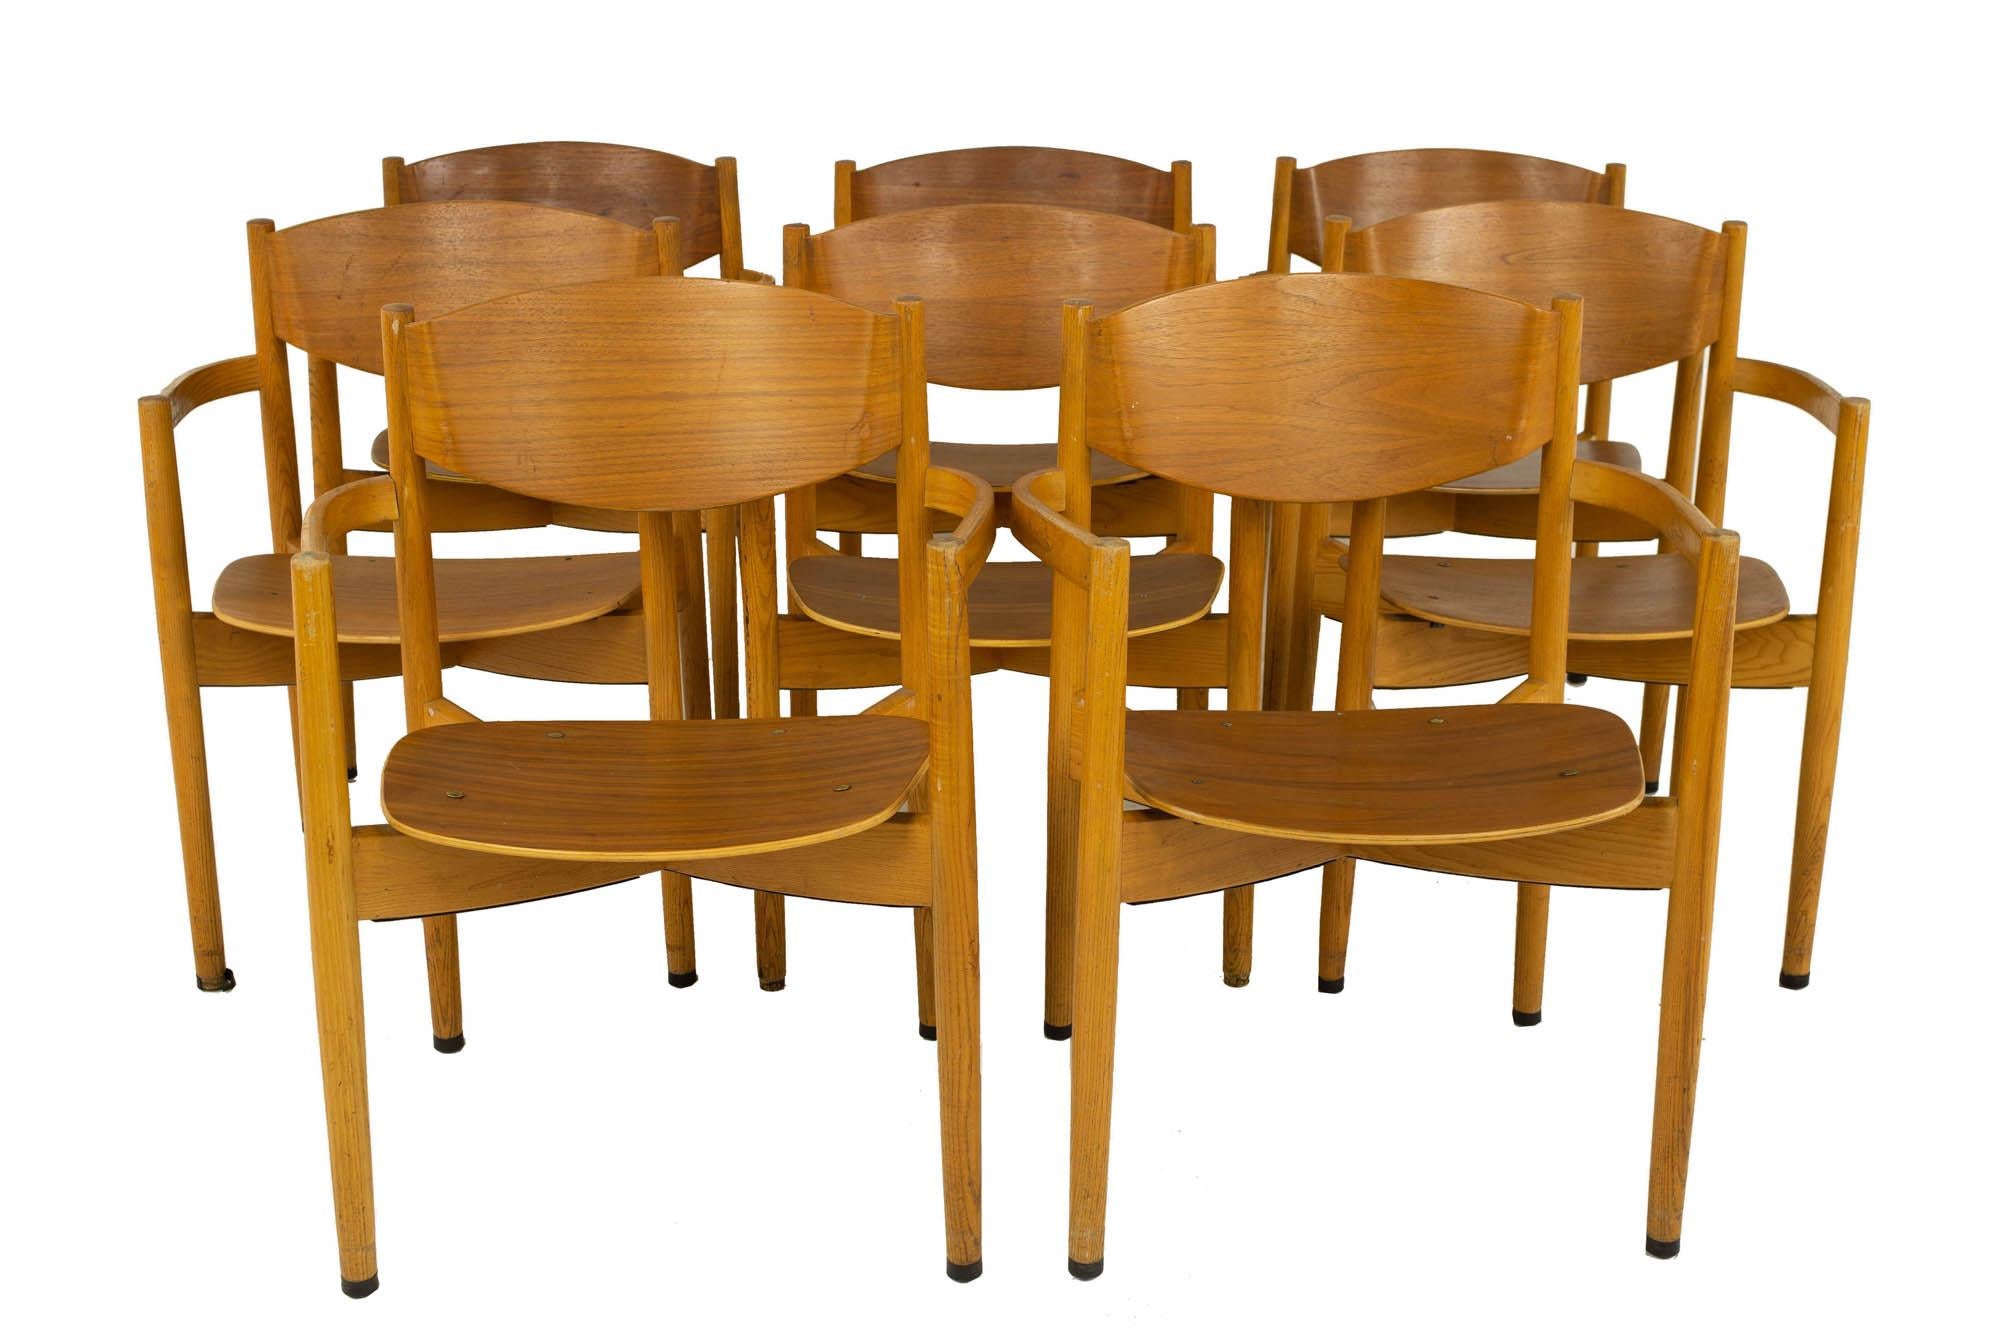 Jens Risom mid century general purpose walnut dining chairs - set of 8

Each chair measures: 24.5 wide x 20 deep x 32.5 high, with a seat height of 17.75 inches and arm height of 27 inches 

?All pieces of furniture can be had in what we call